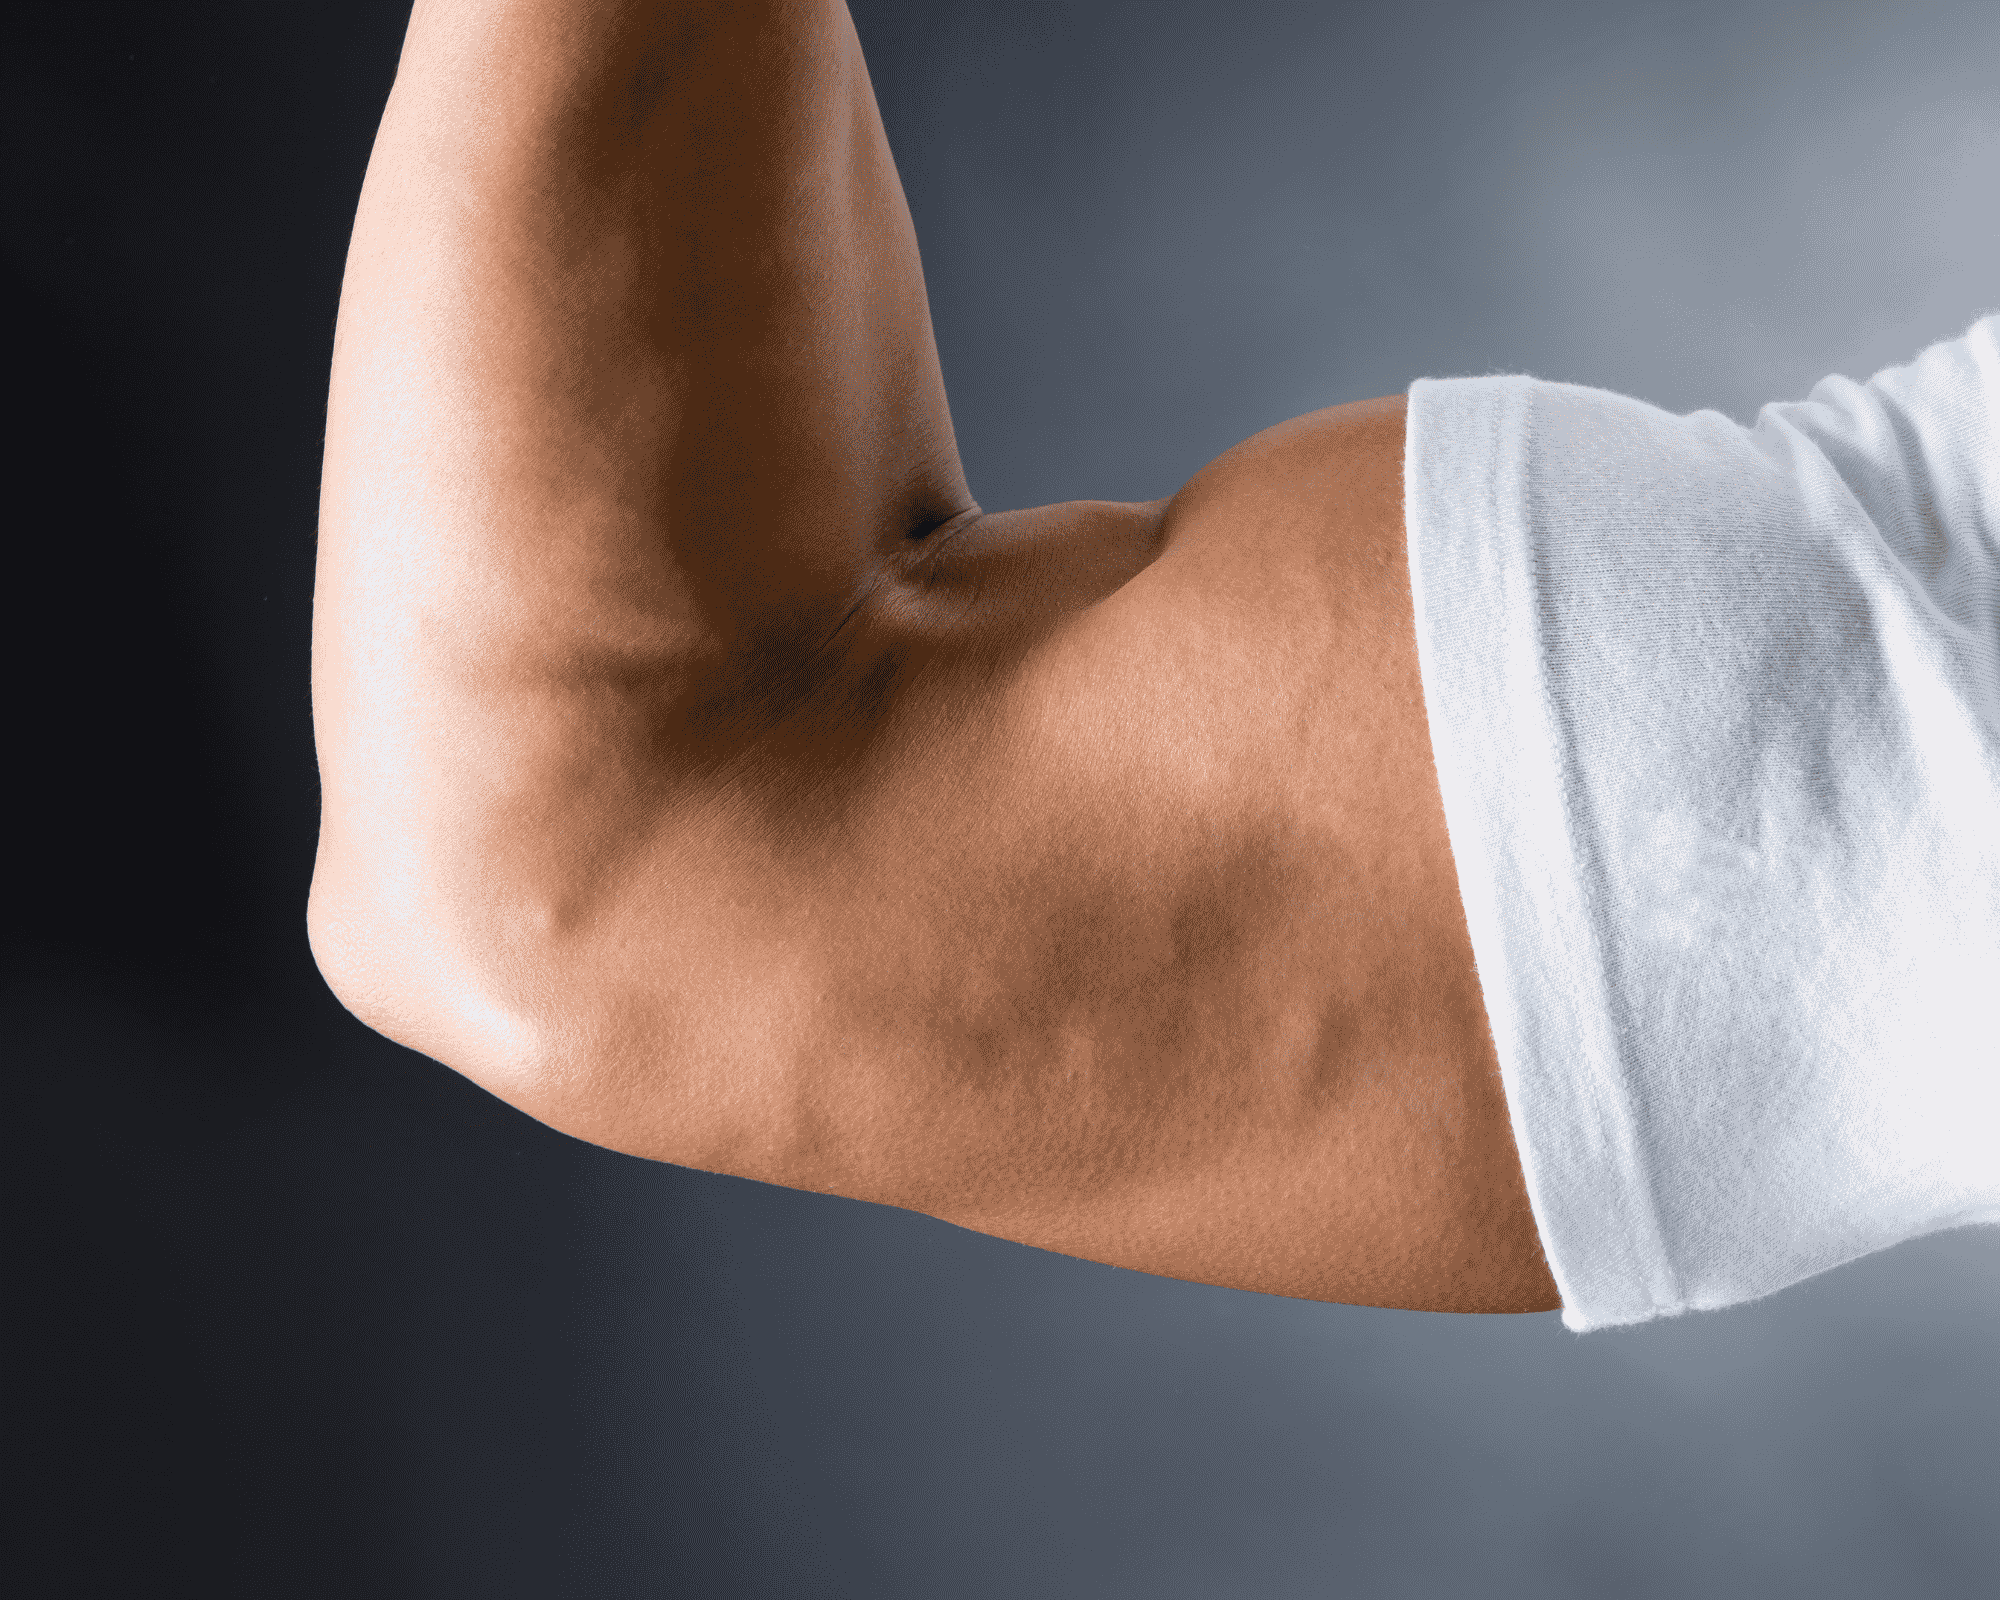 7 Reasons Why Muscles Stop Growing While Bodybuilding